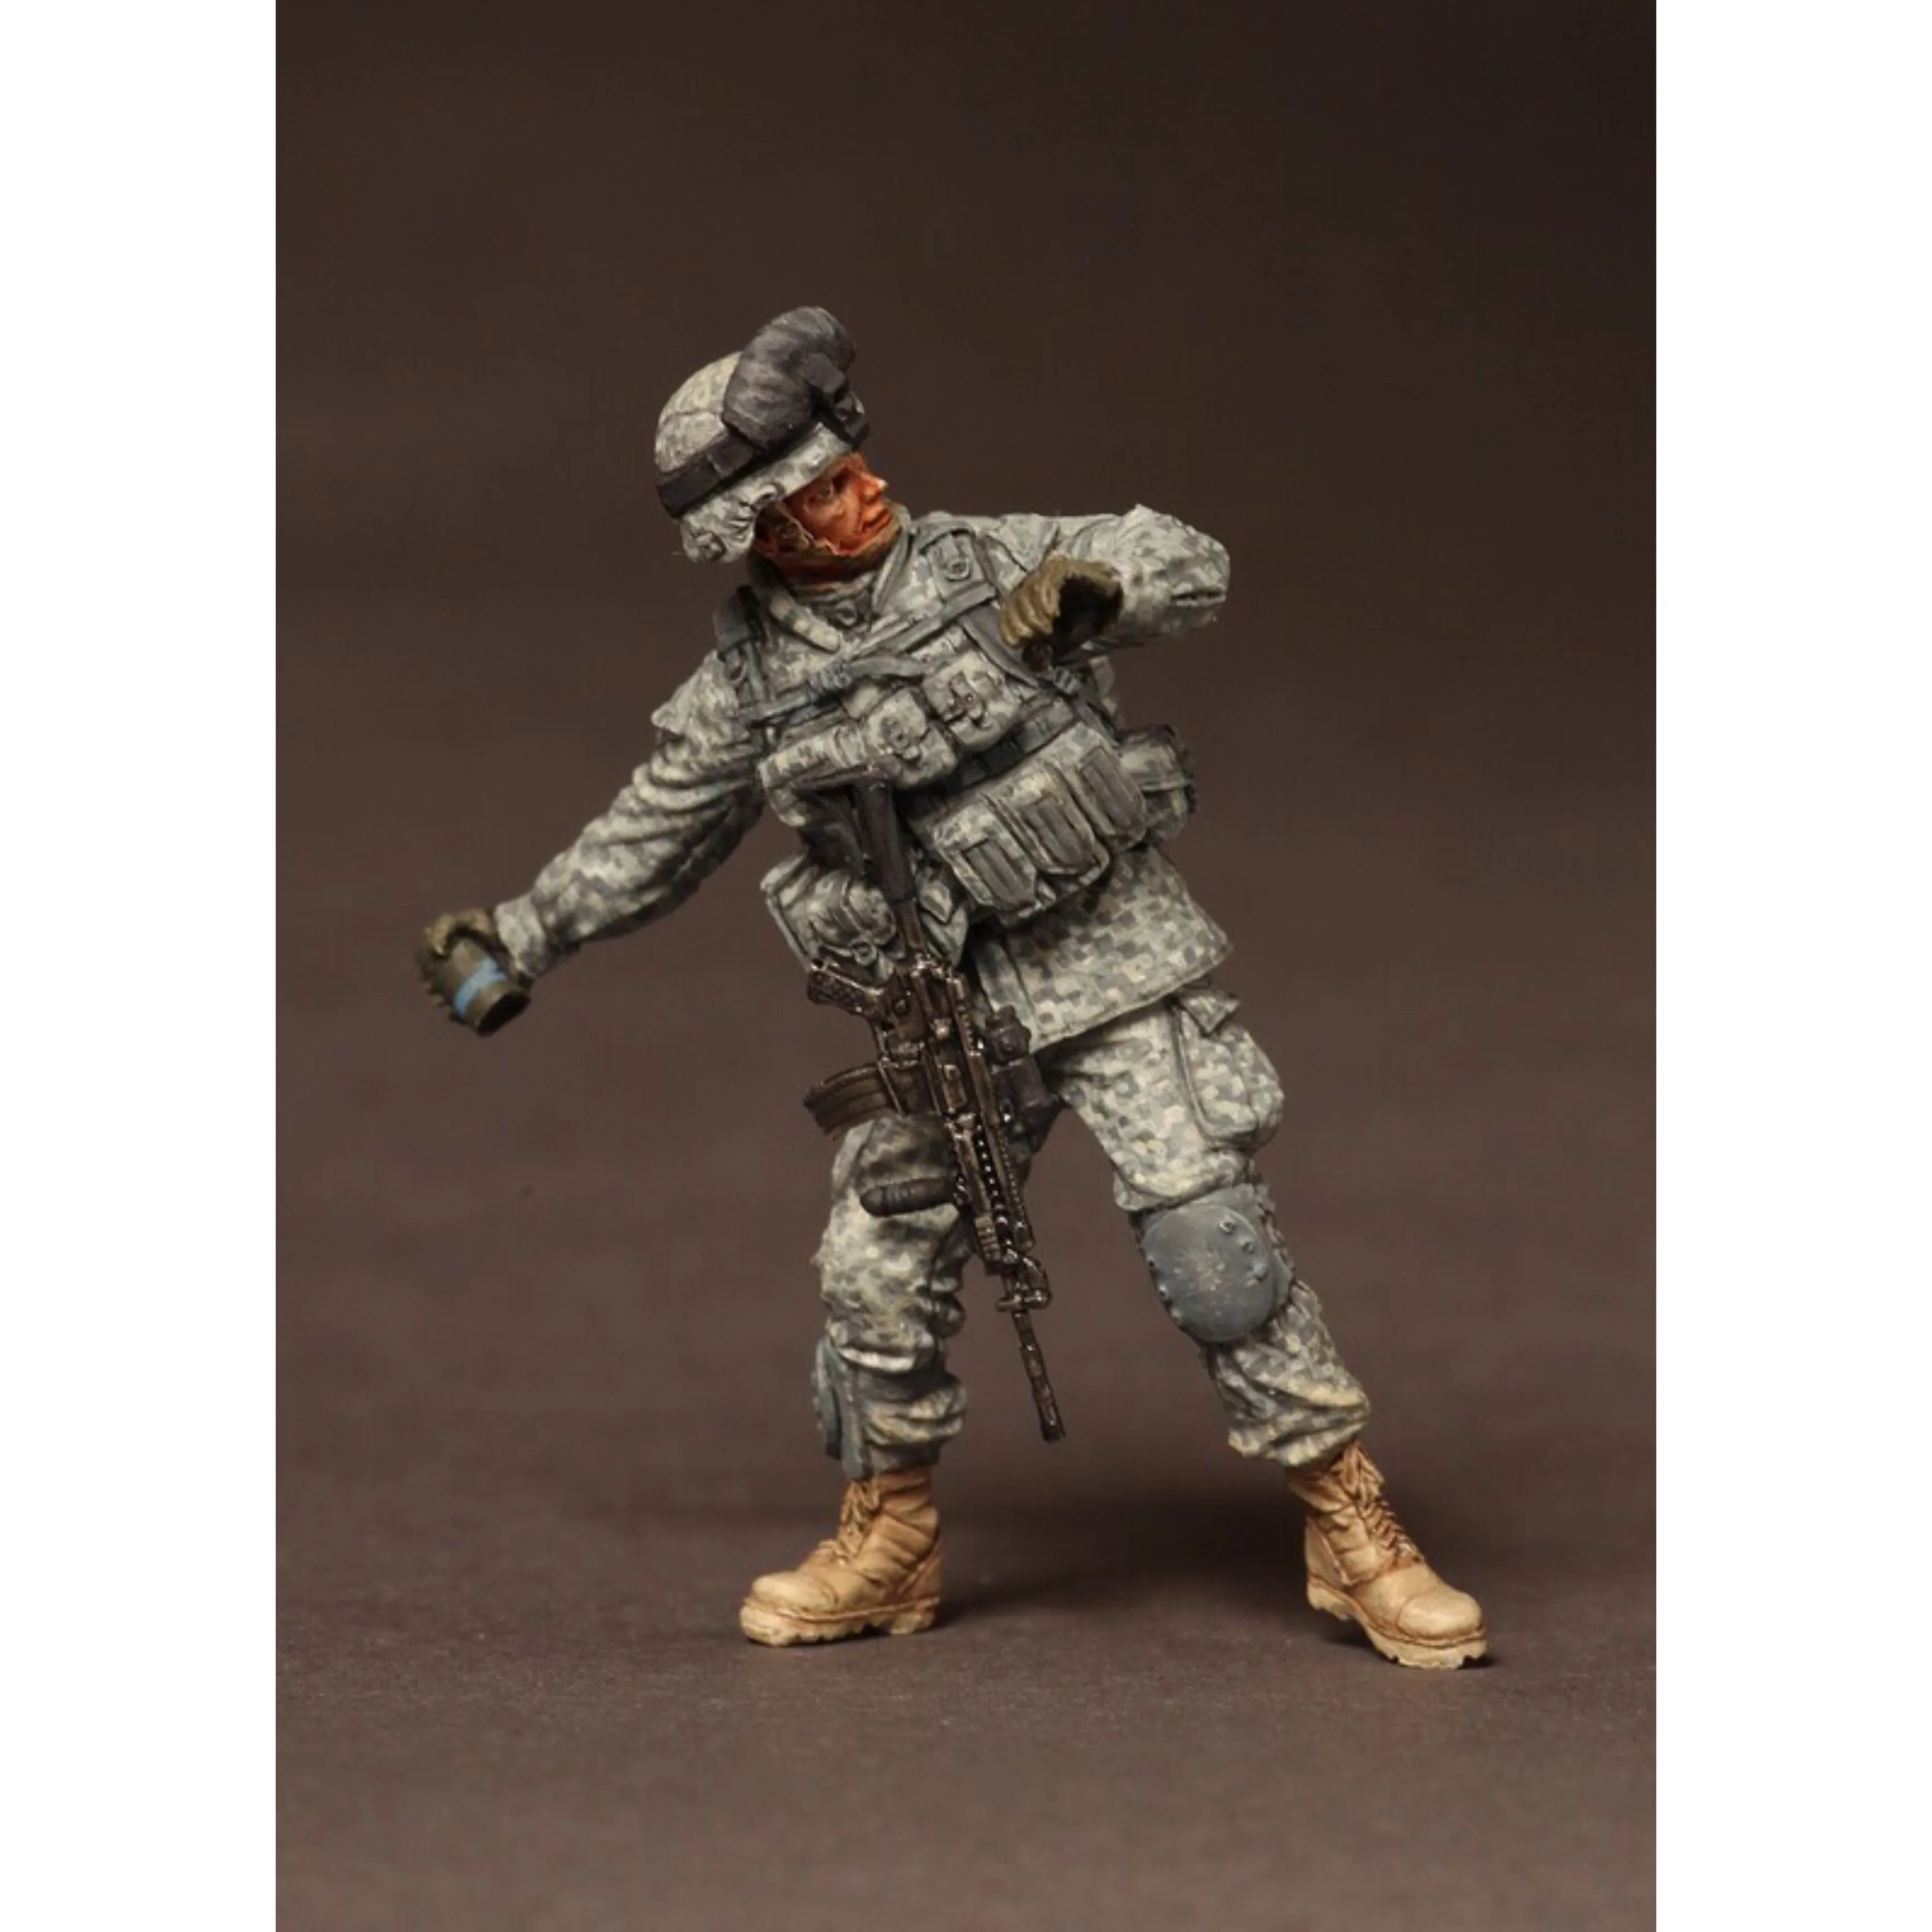 1/35 Resin Model Figure GK, Military theme ，Unassembled and unpainted kit